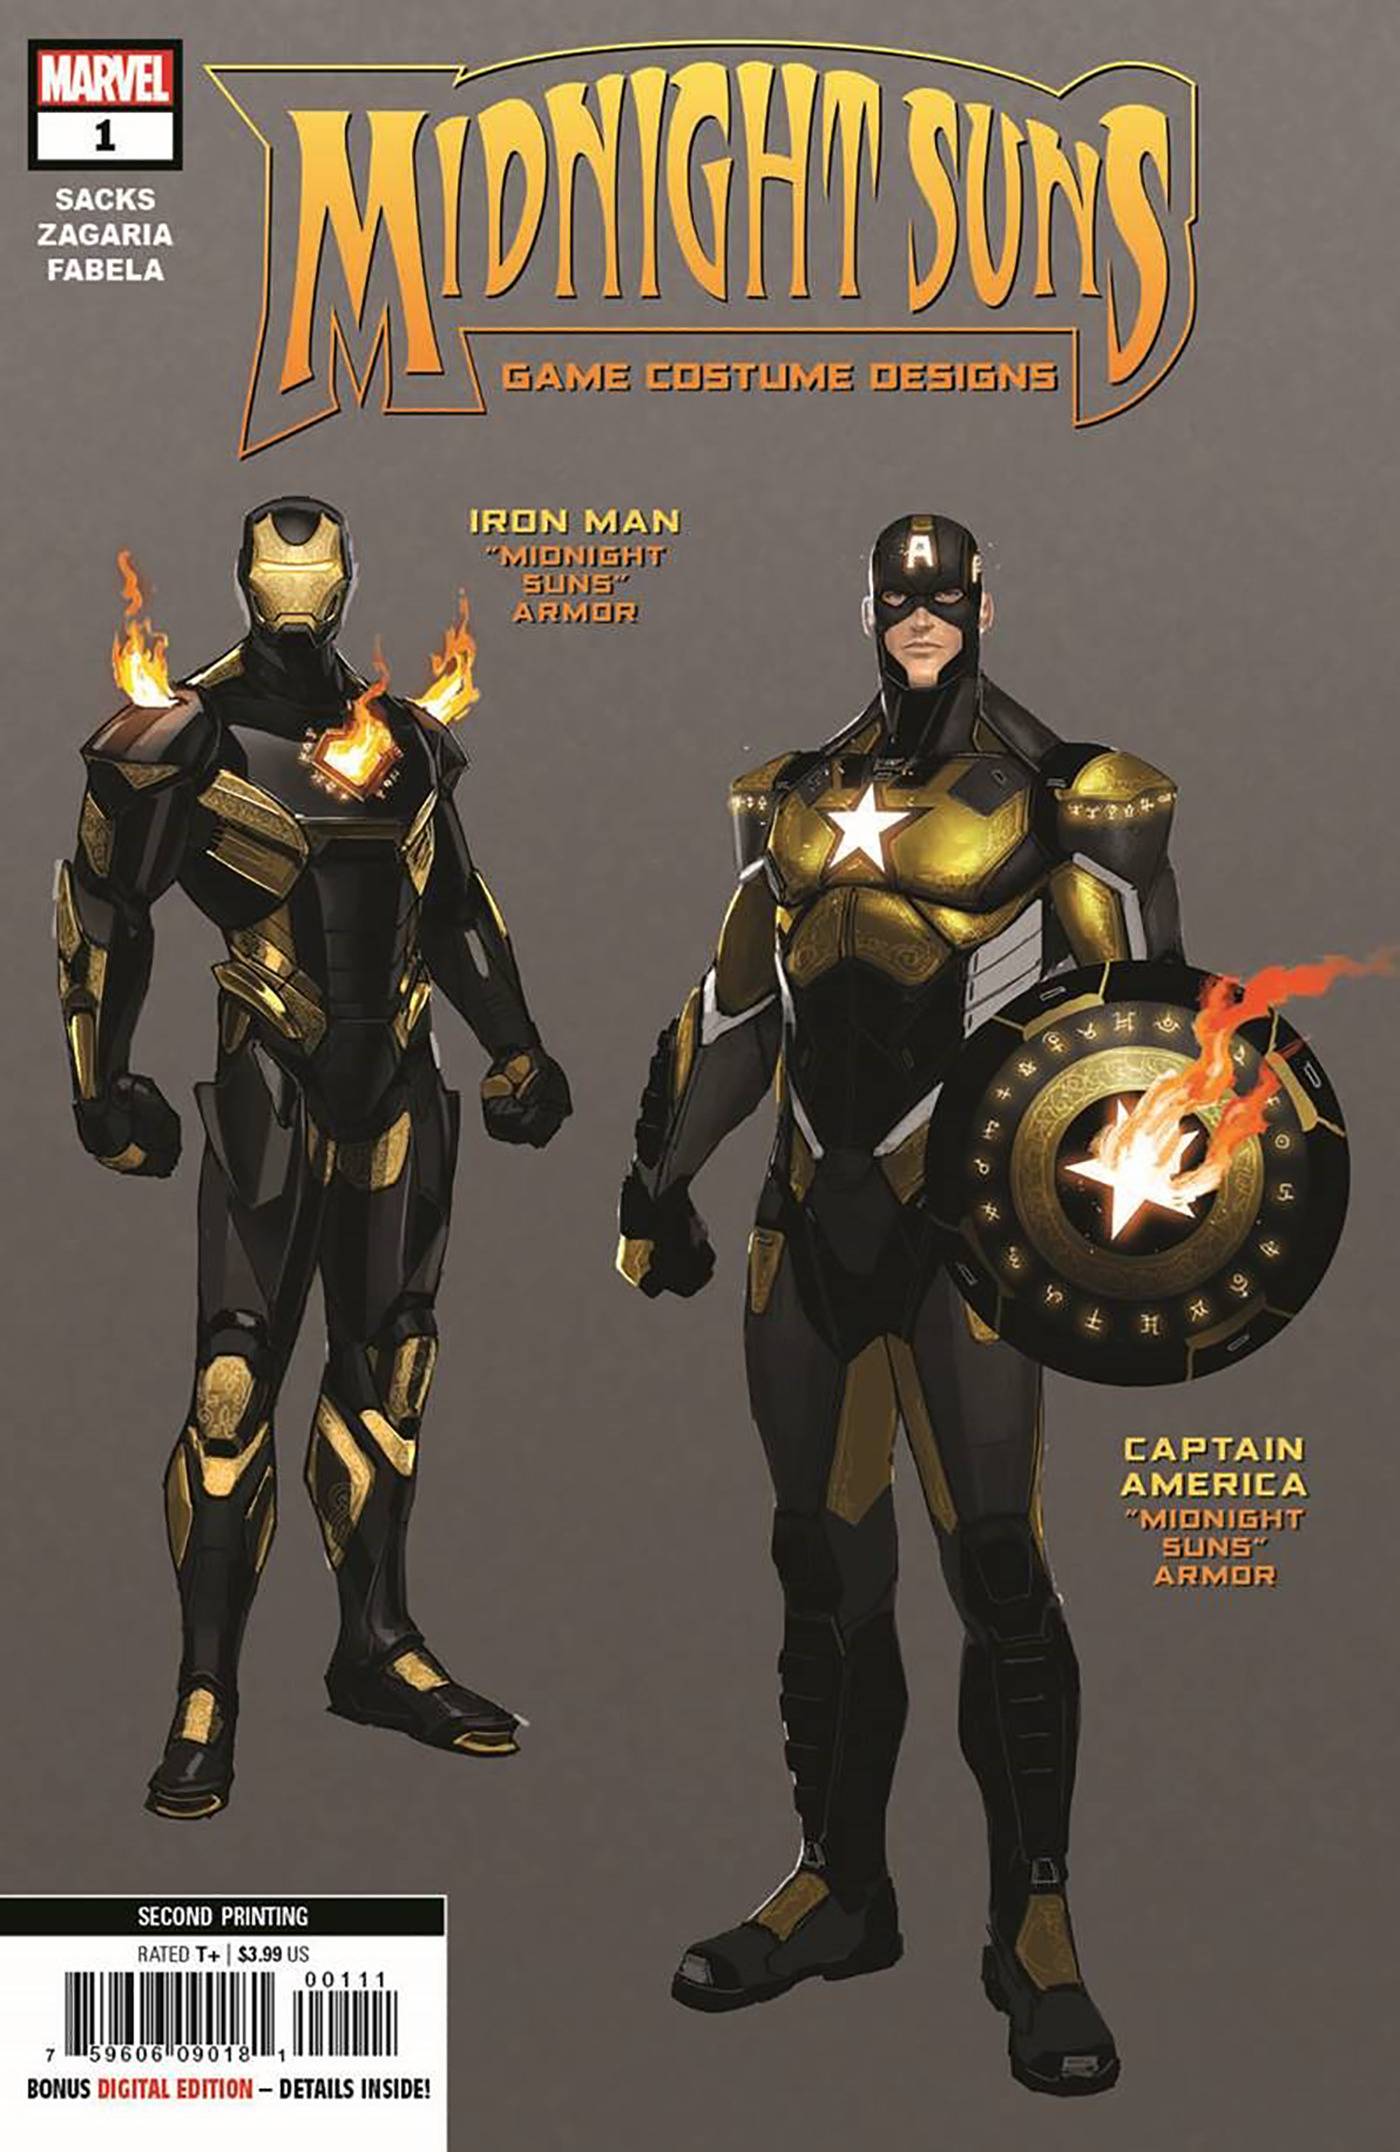 What is Marvel's Midnight Suns About?